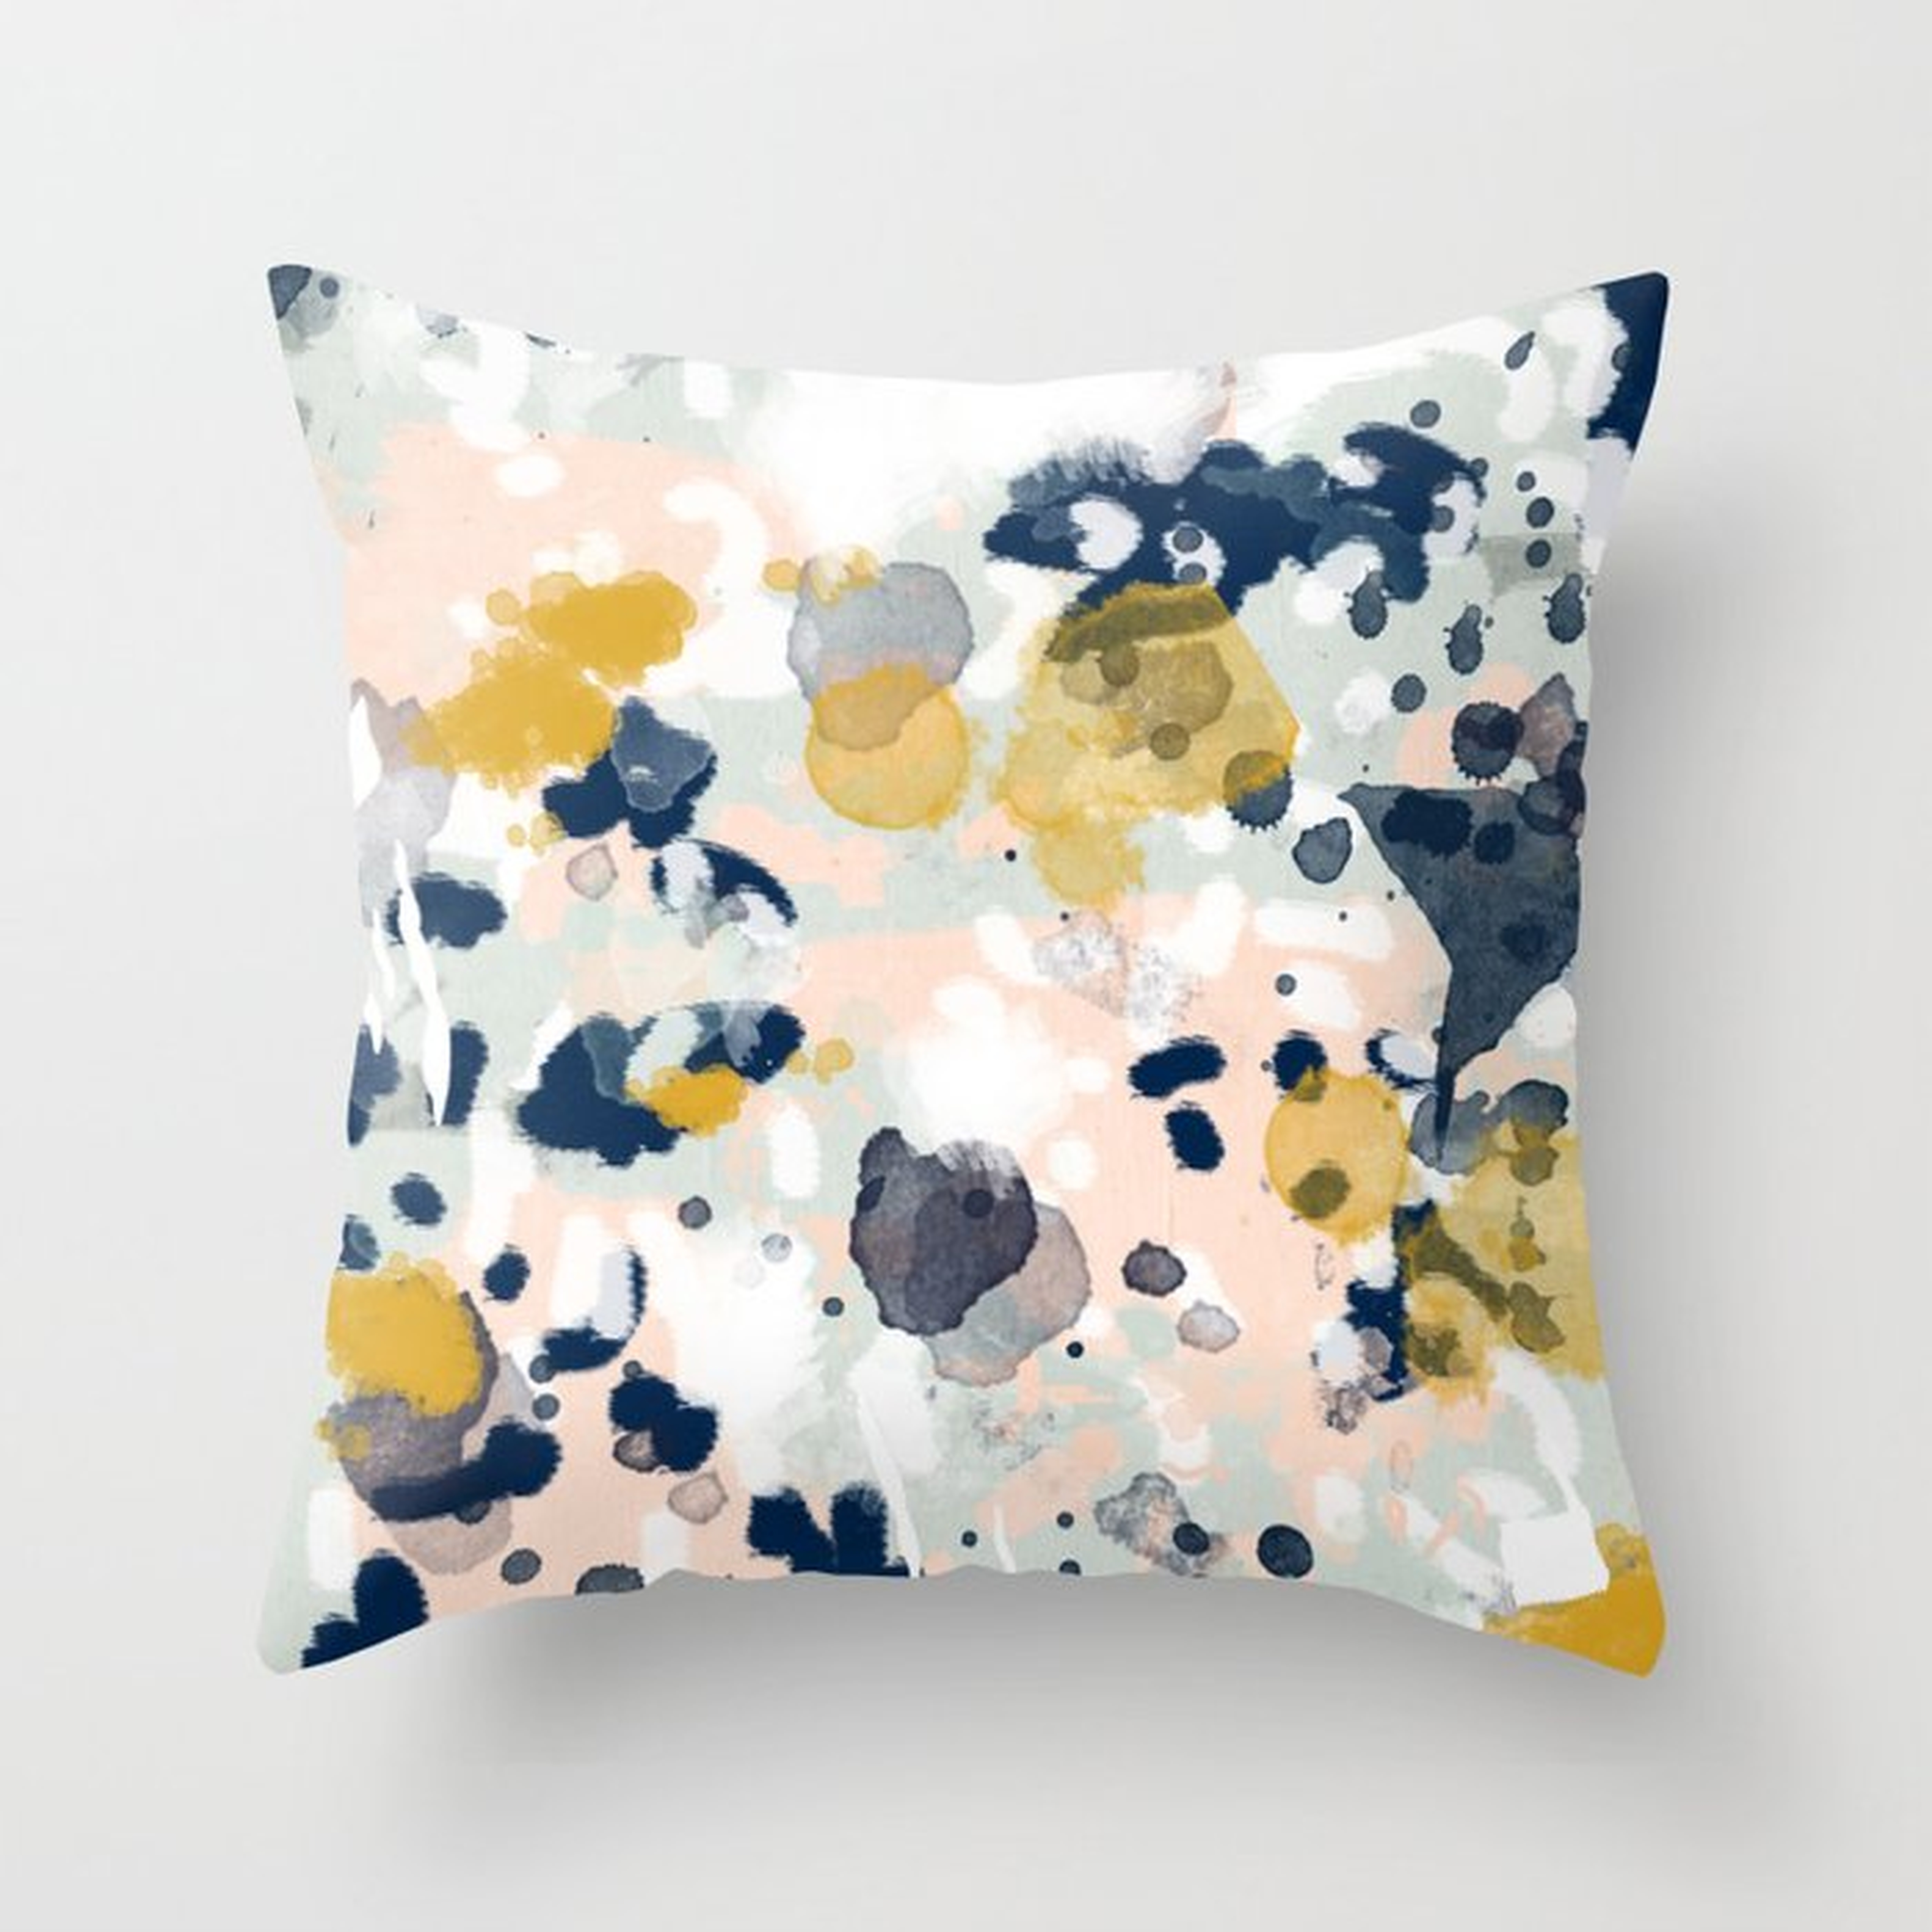 Noel - Navy Mint Gold Painted Abstract Brushstrokes Minimal Modern Canvas Art Painting Throw Pillow by Charlottewinter - Cover (20" x 20") With Pillow Insert - Indoor Pillow - Society6